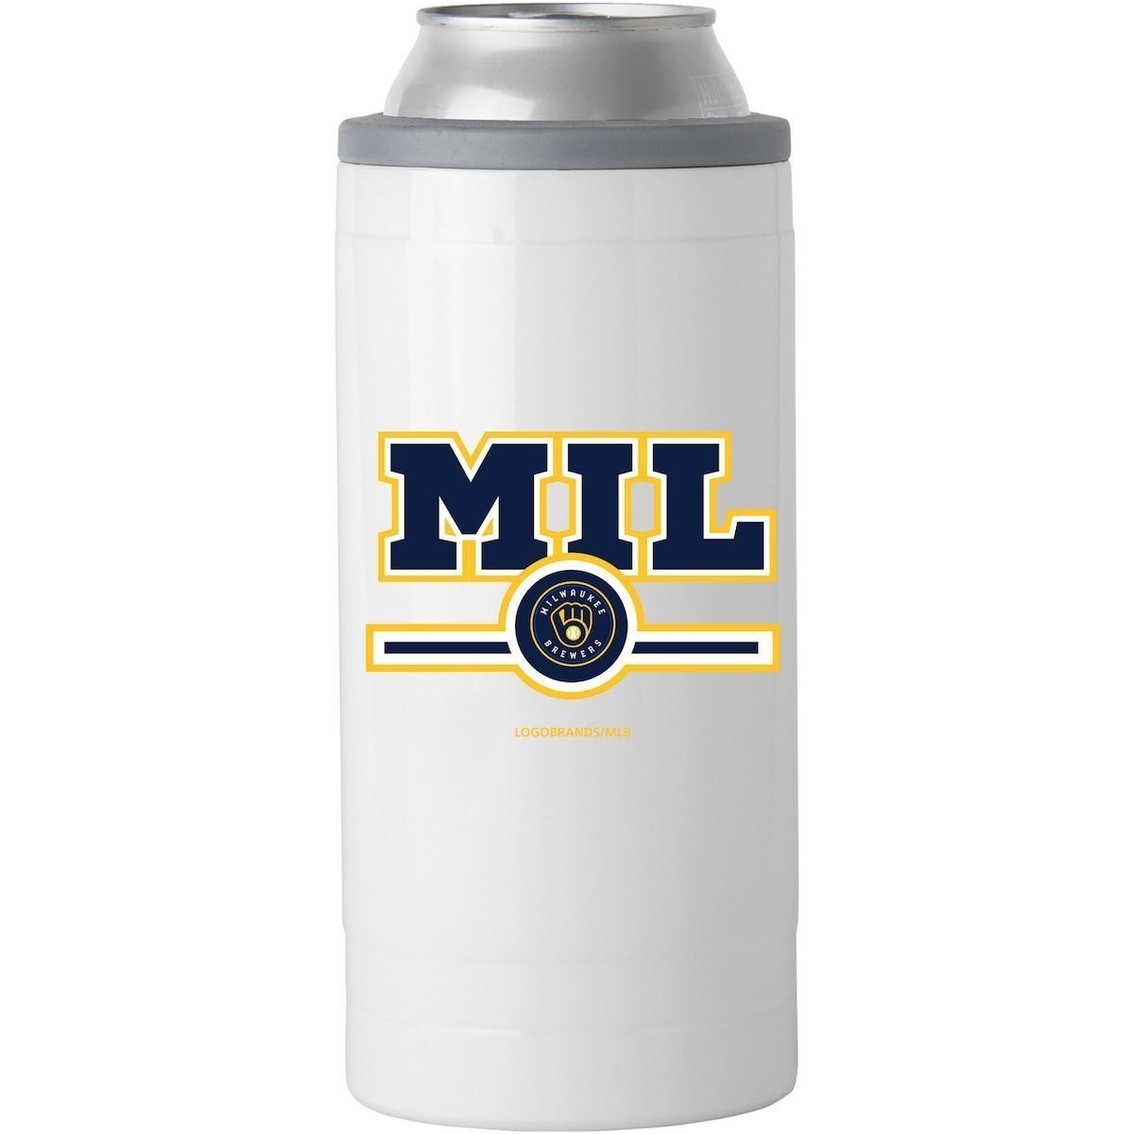 Logo Brands Milwaukee Brewers 12oz. Letterman Slim Can Cooler - Image 2 of 3